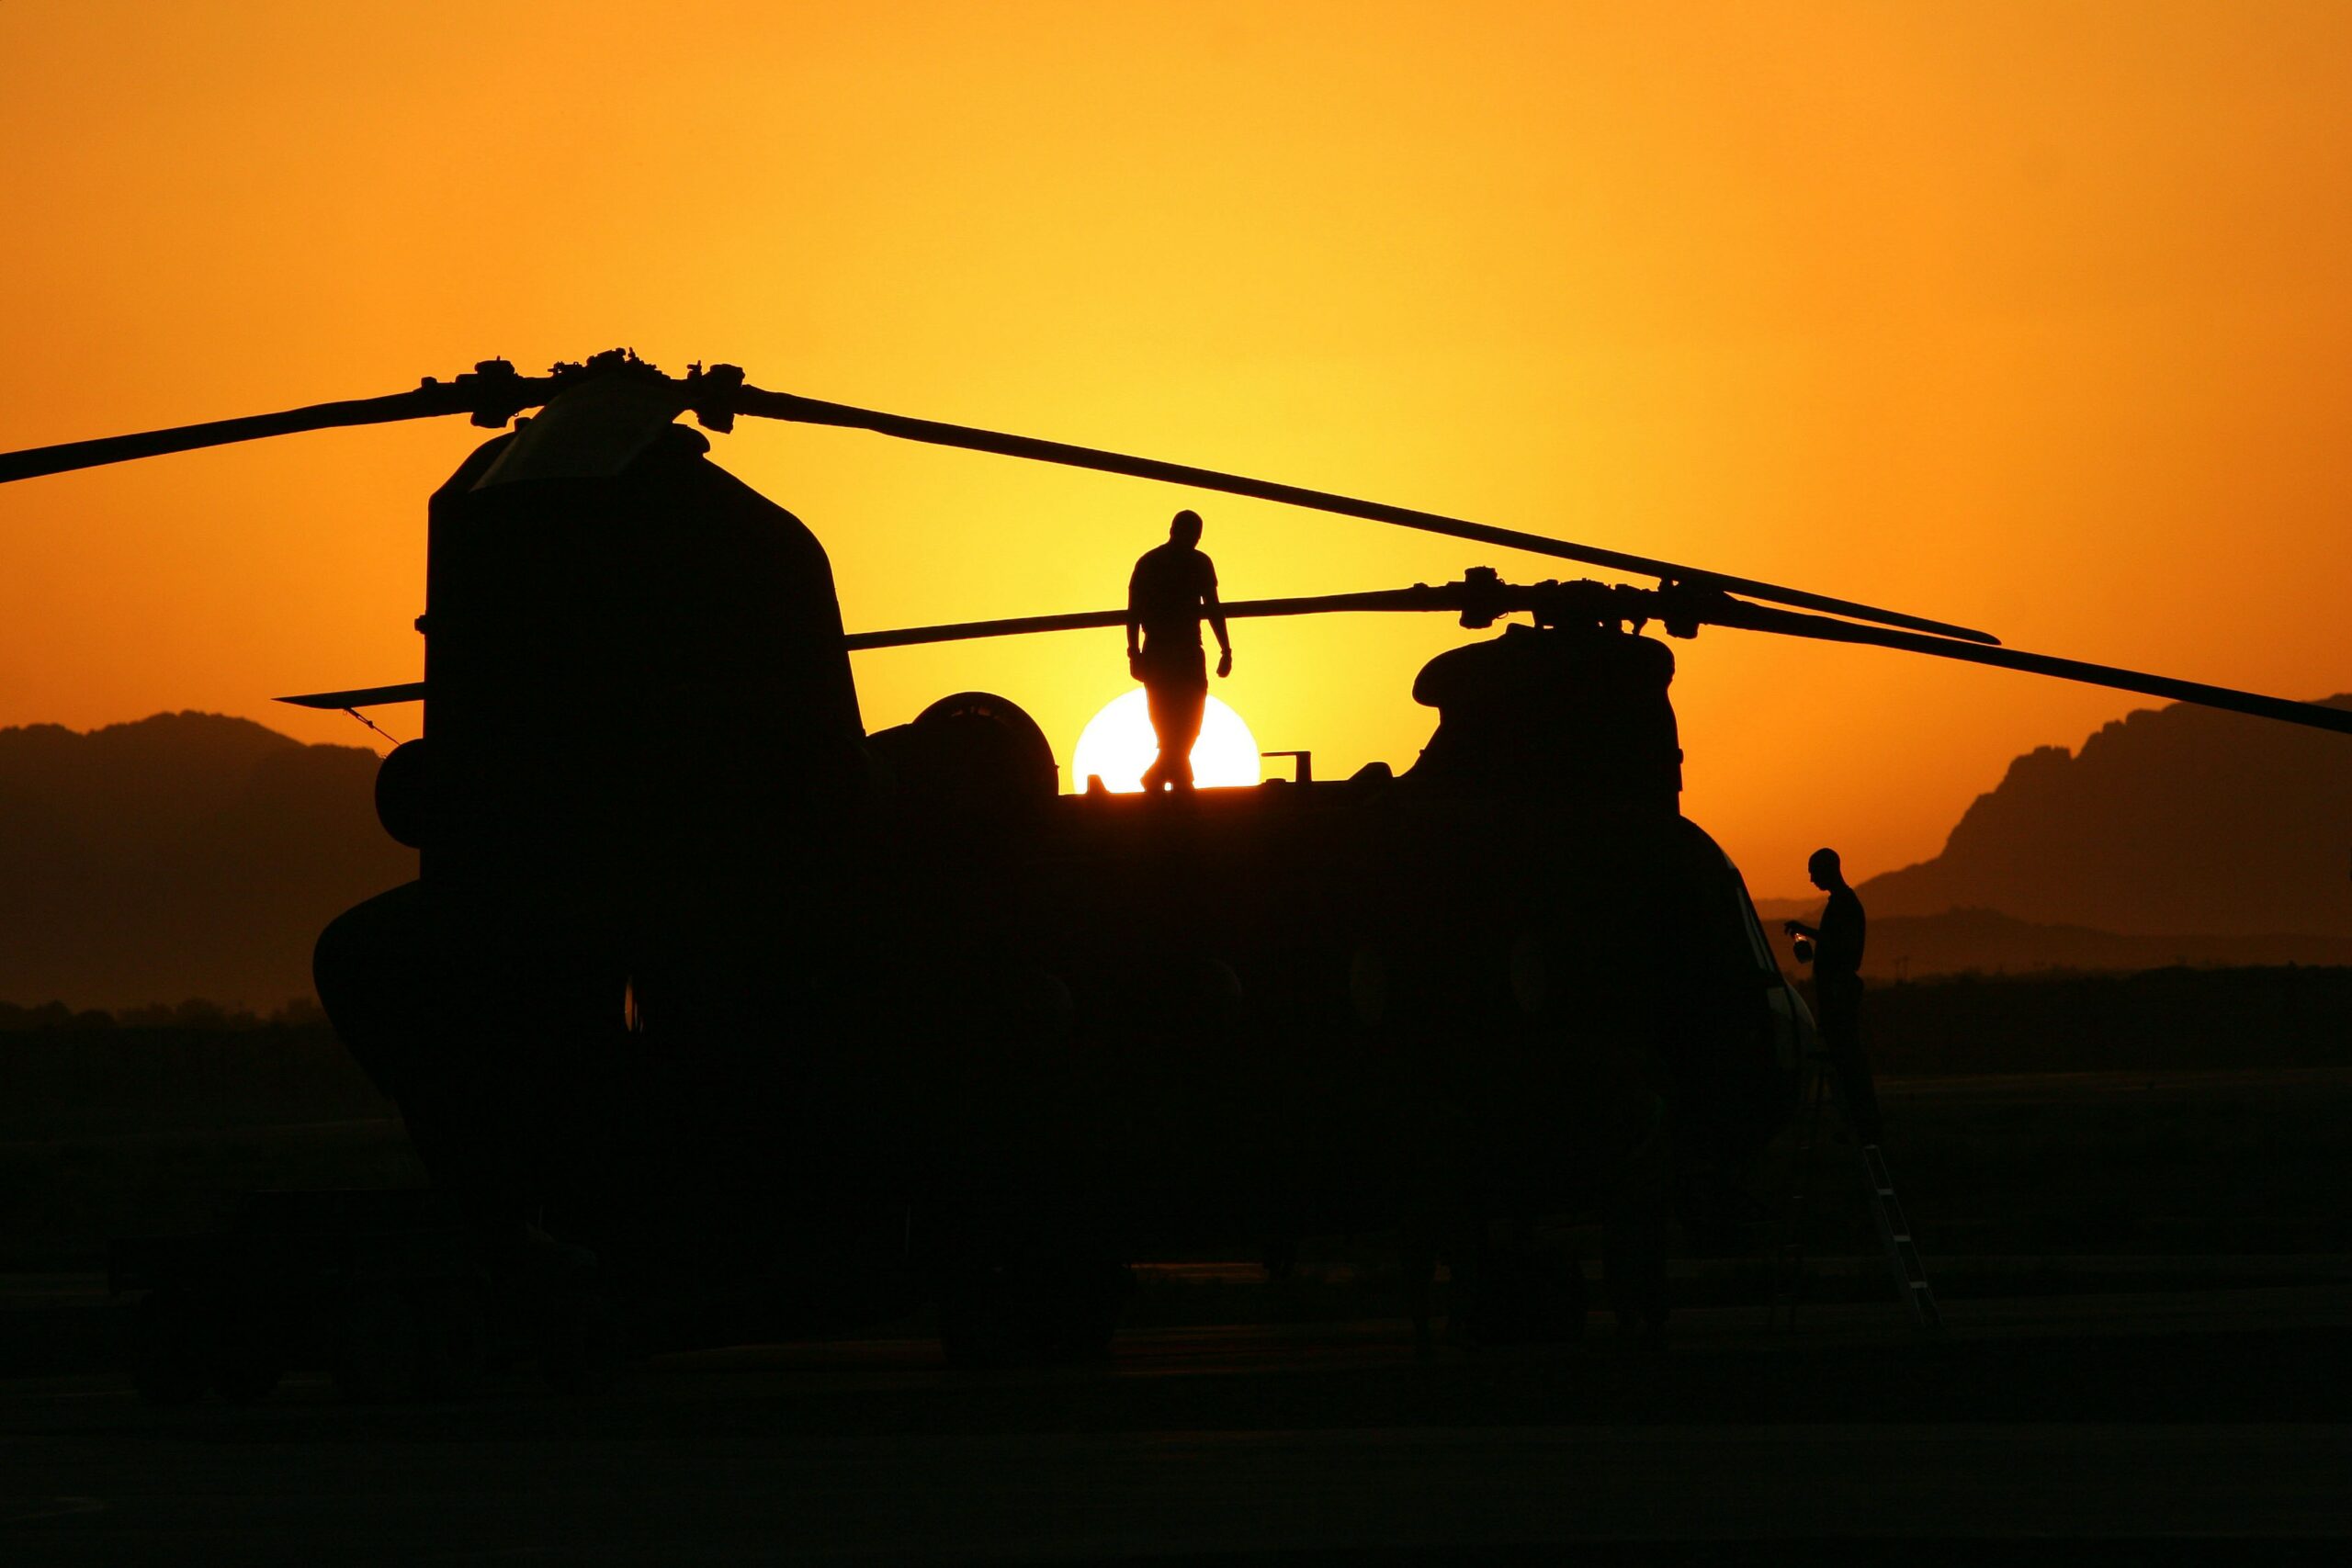 MH-47 Chinook of the 160th Special Operations Aviation Regiment